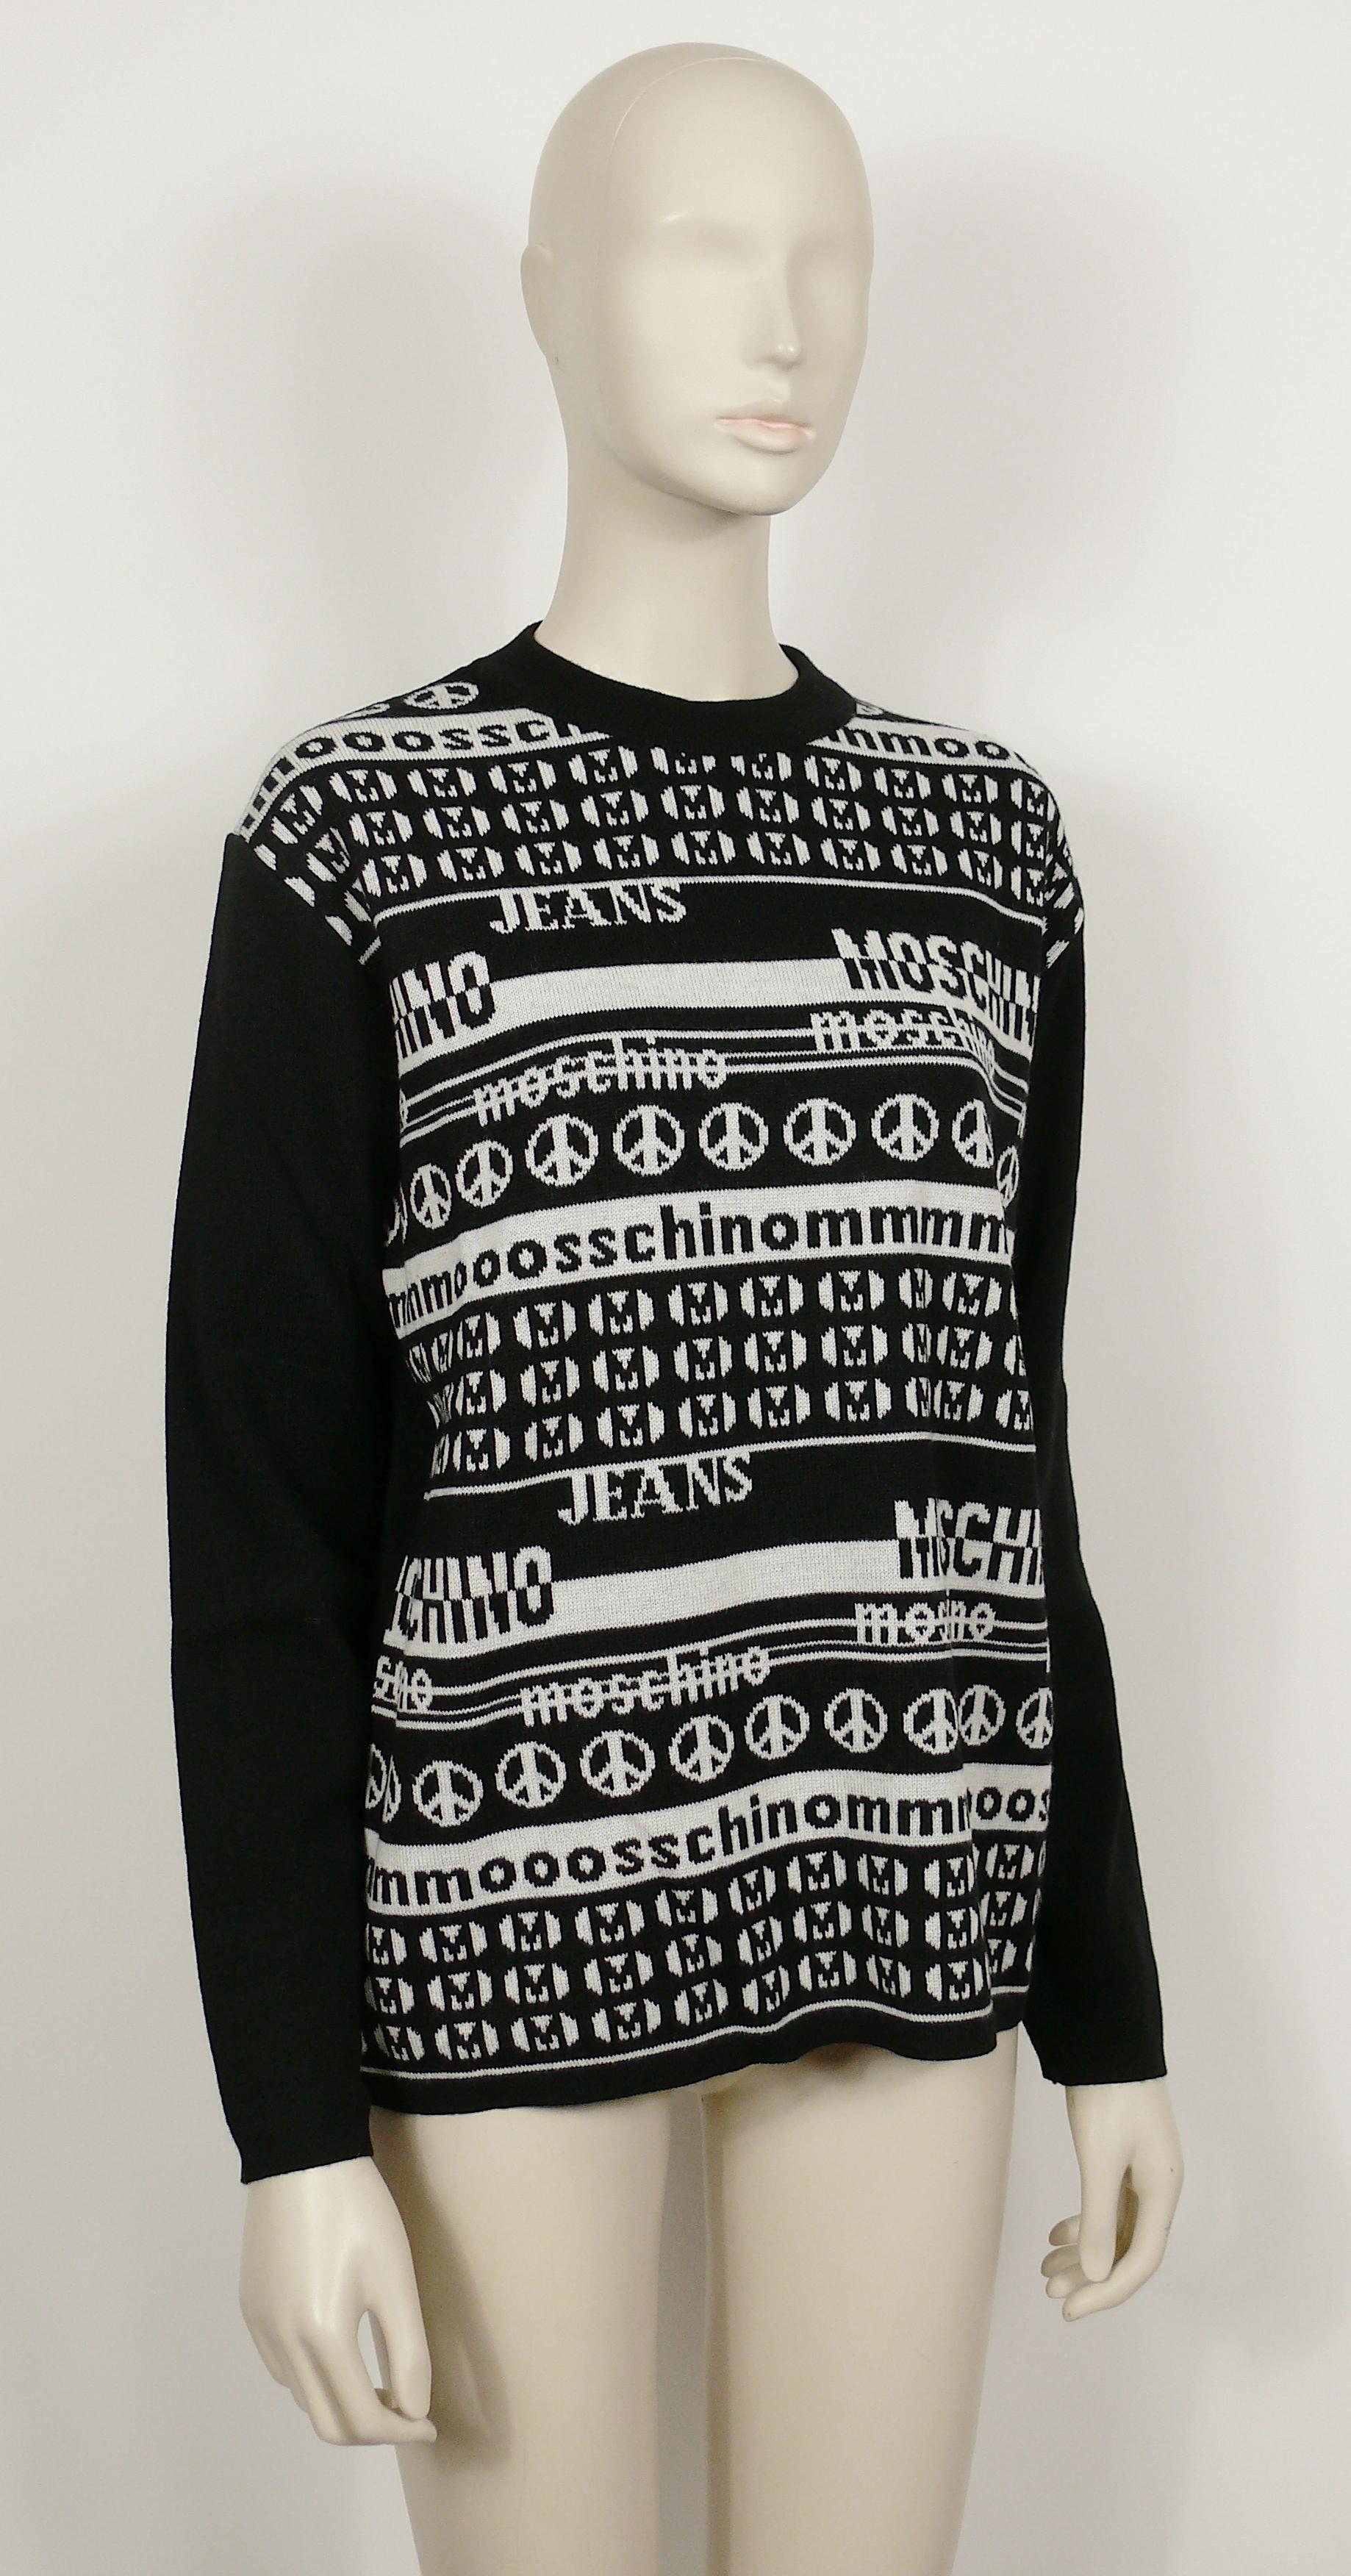 MOSCHINO vintage light sweater featuring a black and white computer screen desing on front with MOSCHINO, M, Peace signs...

Round neck.
Long sleeves.

Label reads MOSCHINO JEANS.
Made in Italy.

Composition label reads : 100% Wool.

Size label